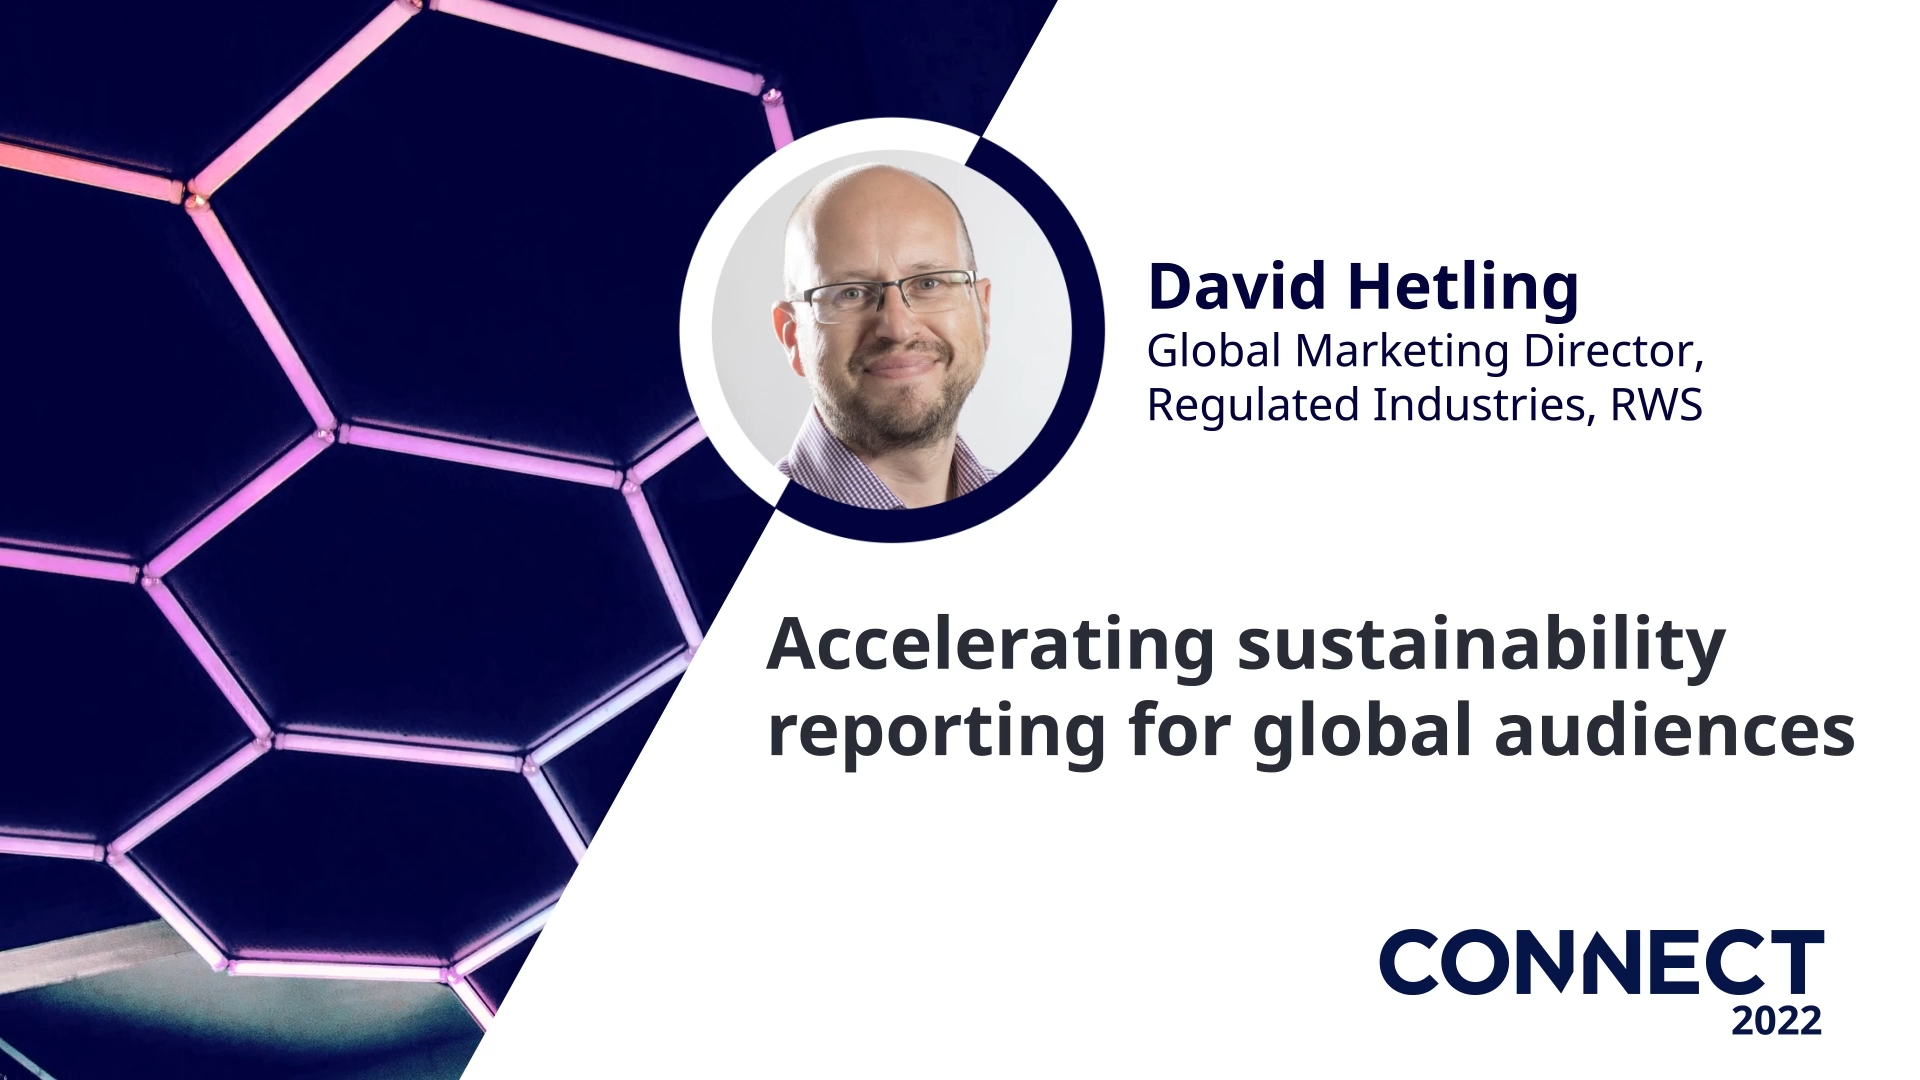 Connect 2022 - Accelerating sustainability reporting for global audiences